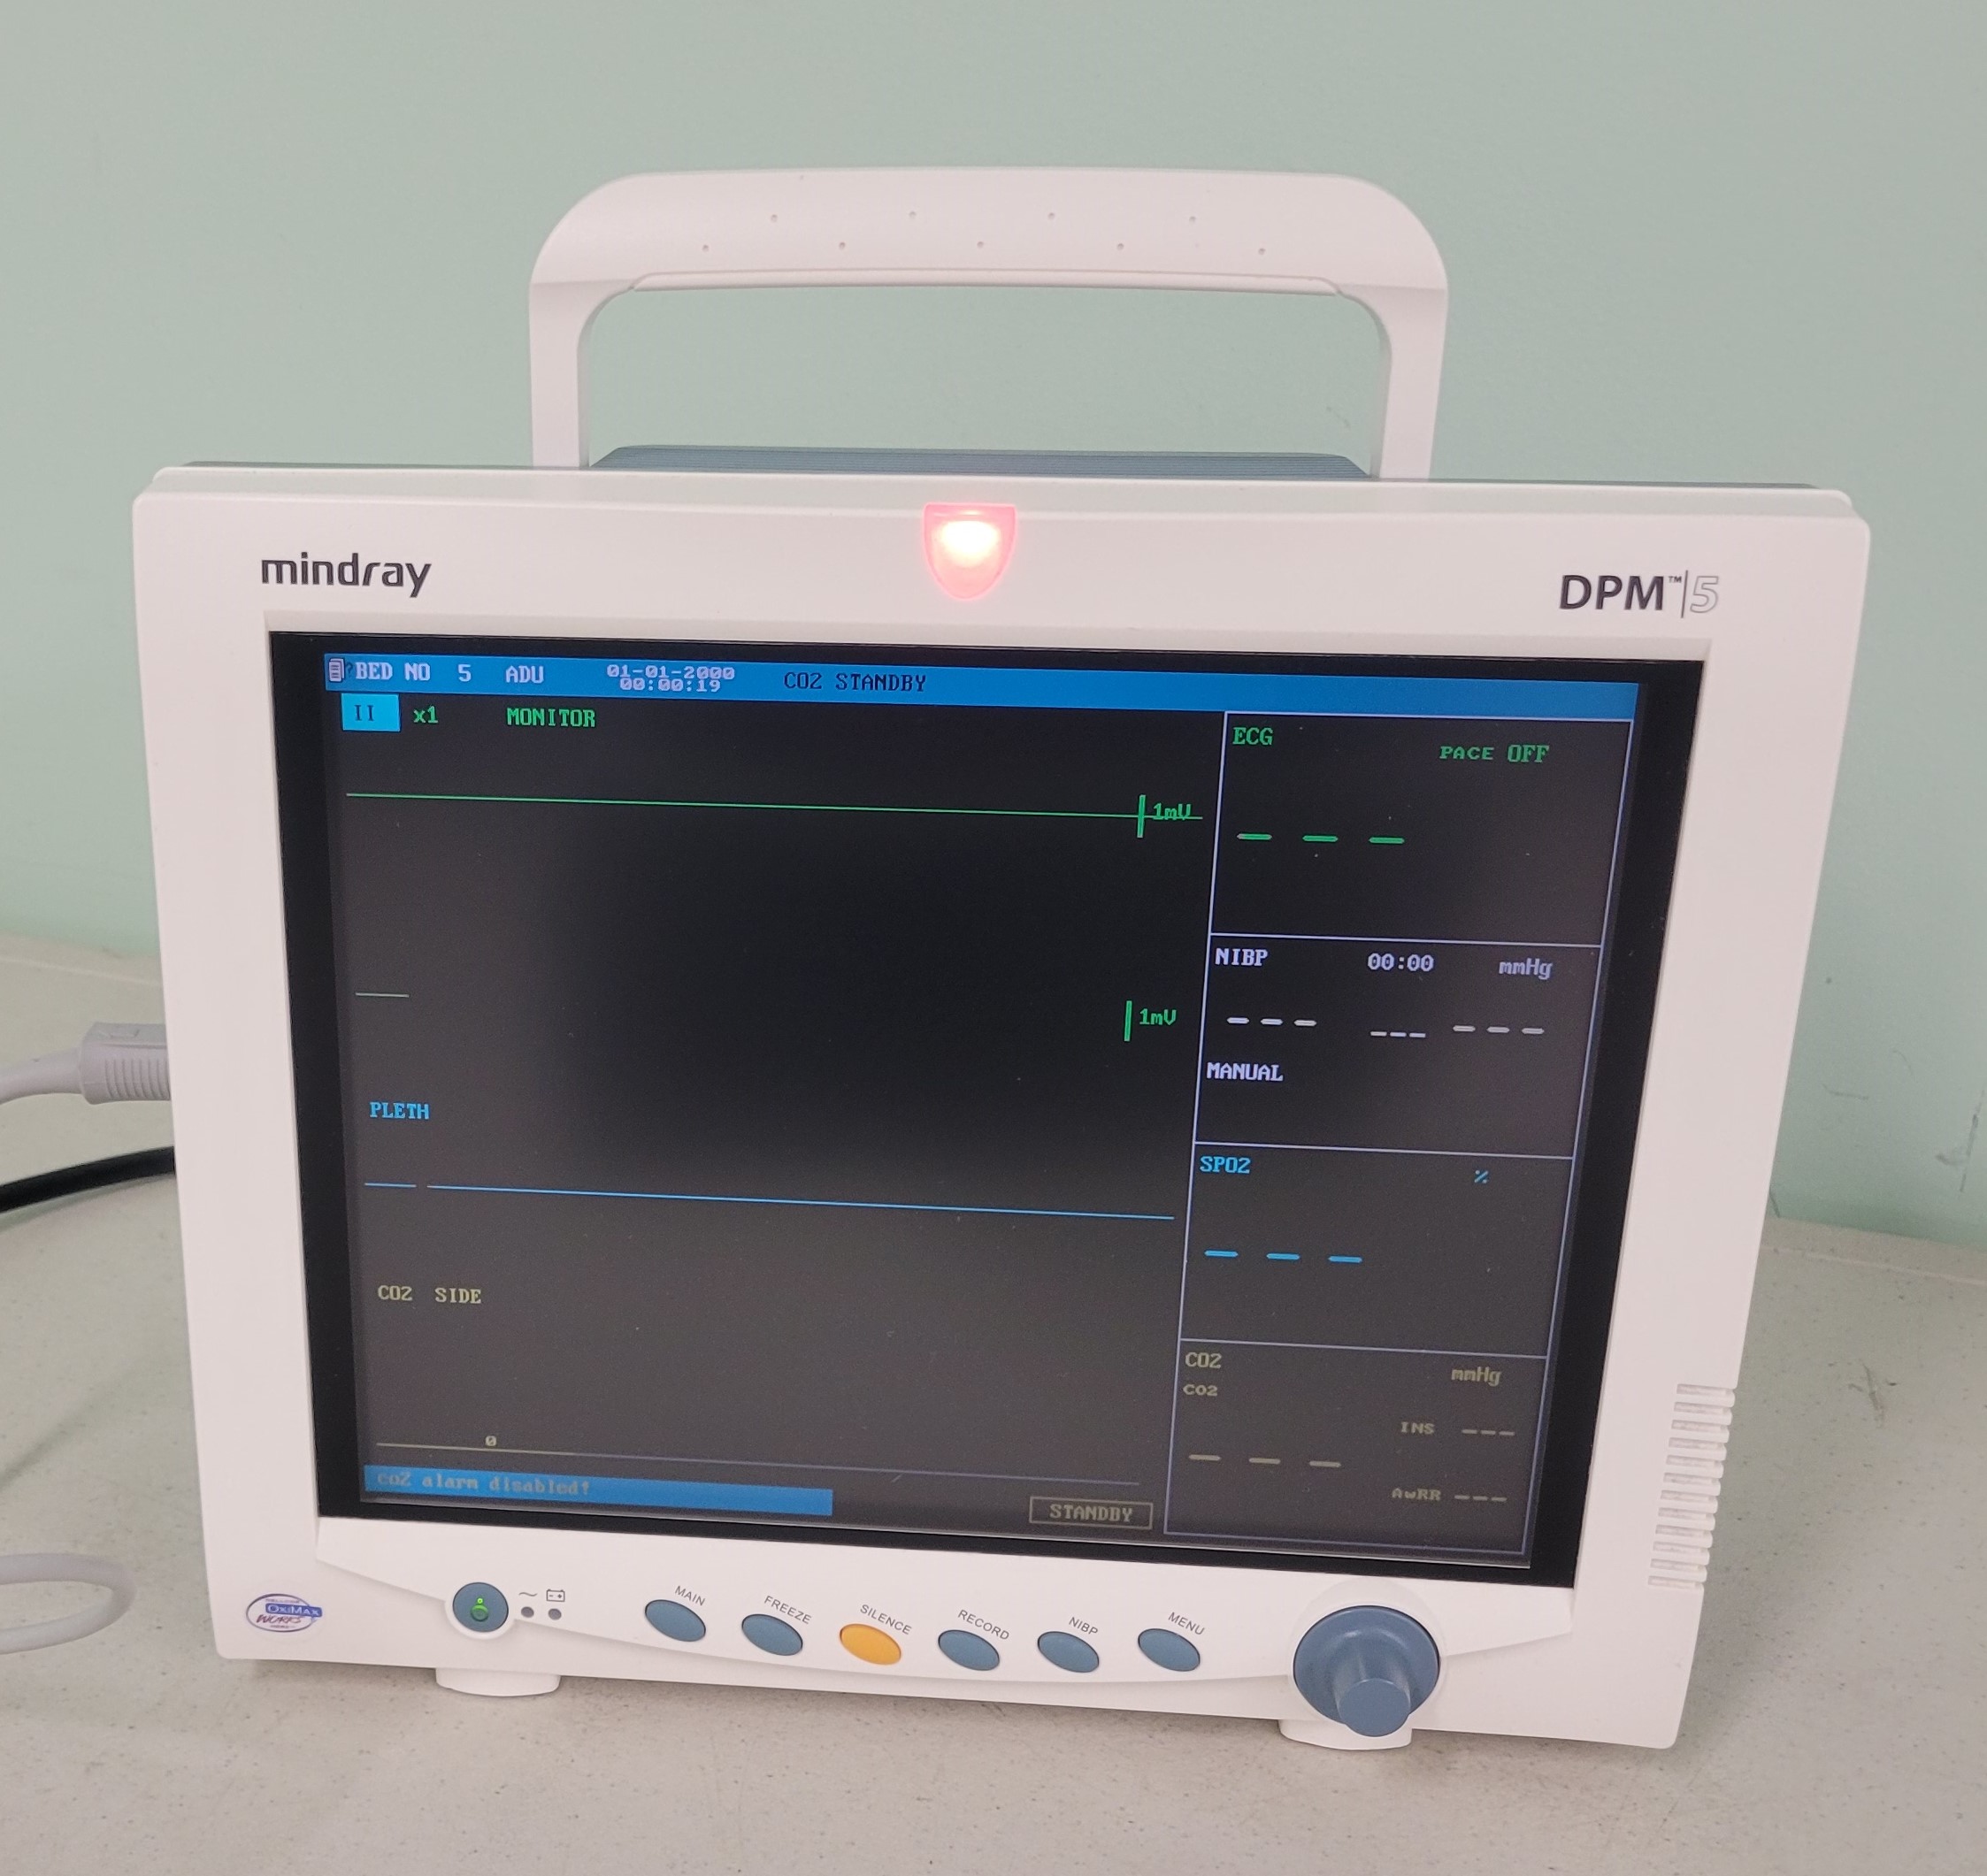 Datascope Mindray DPM5 Patient Monitor